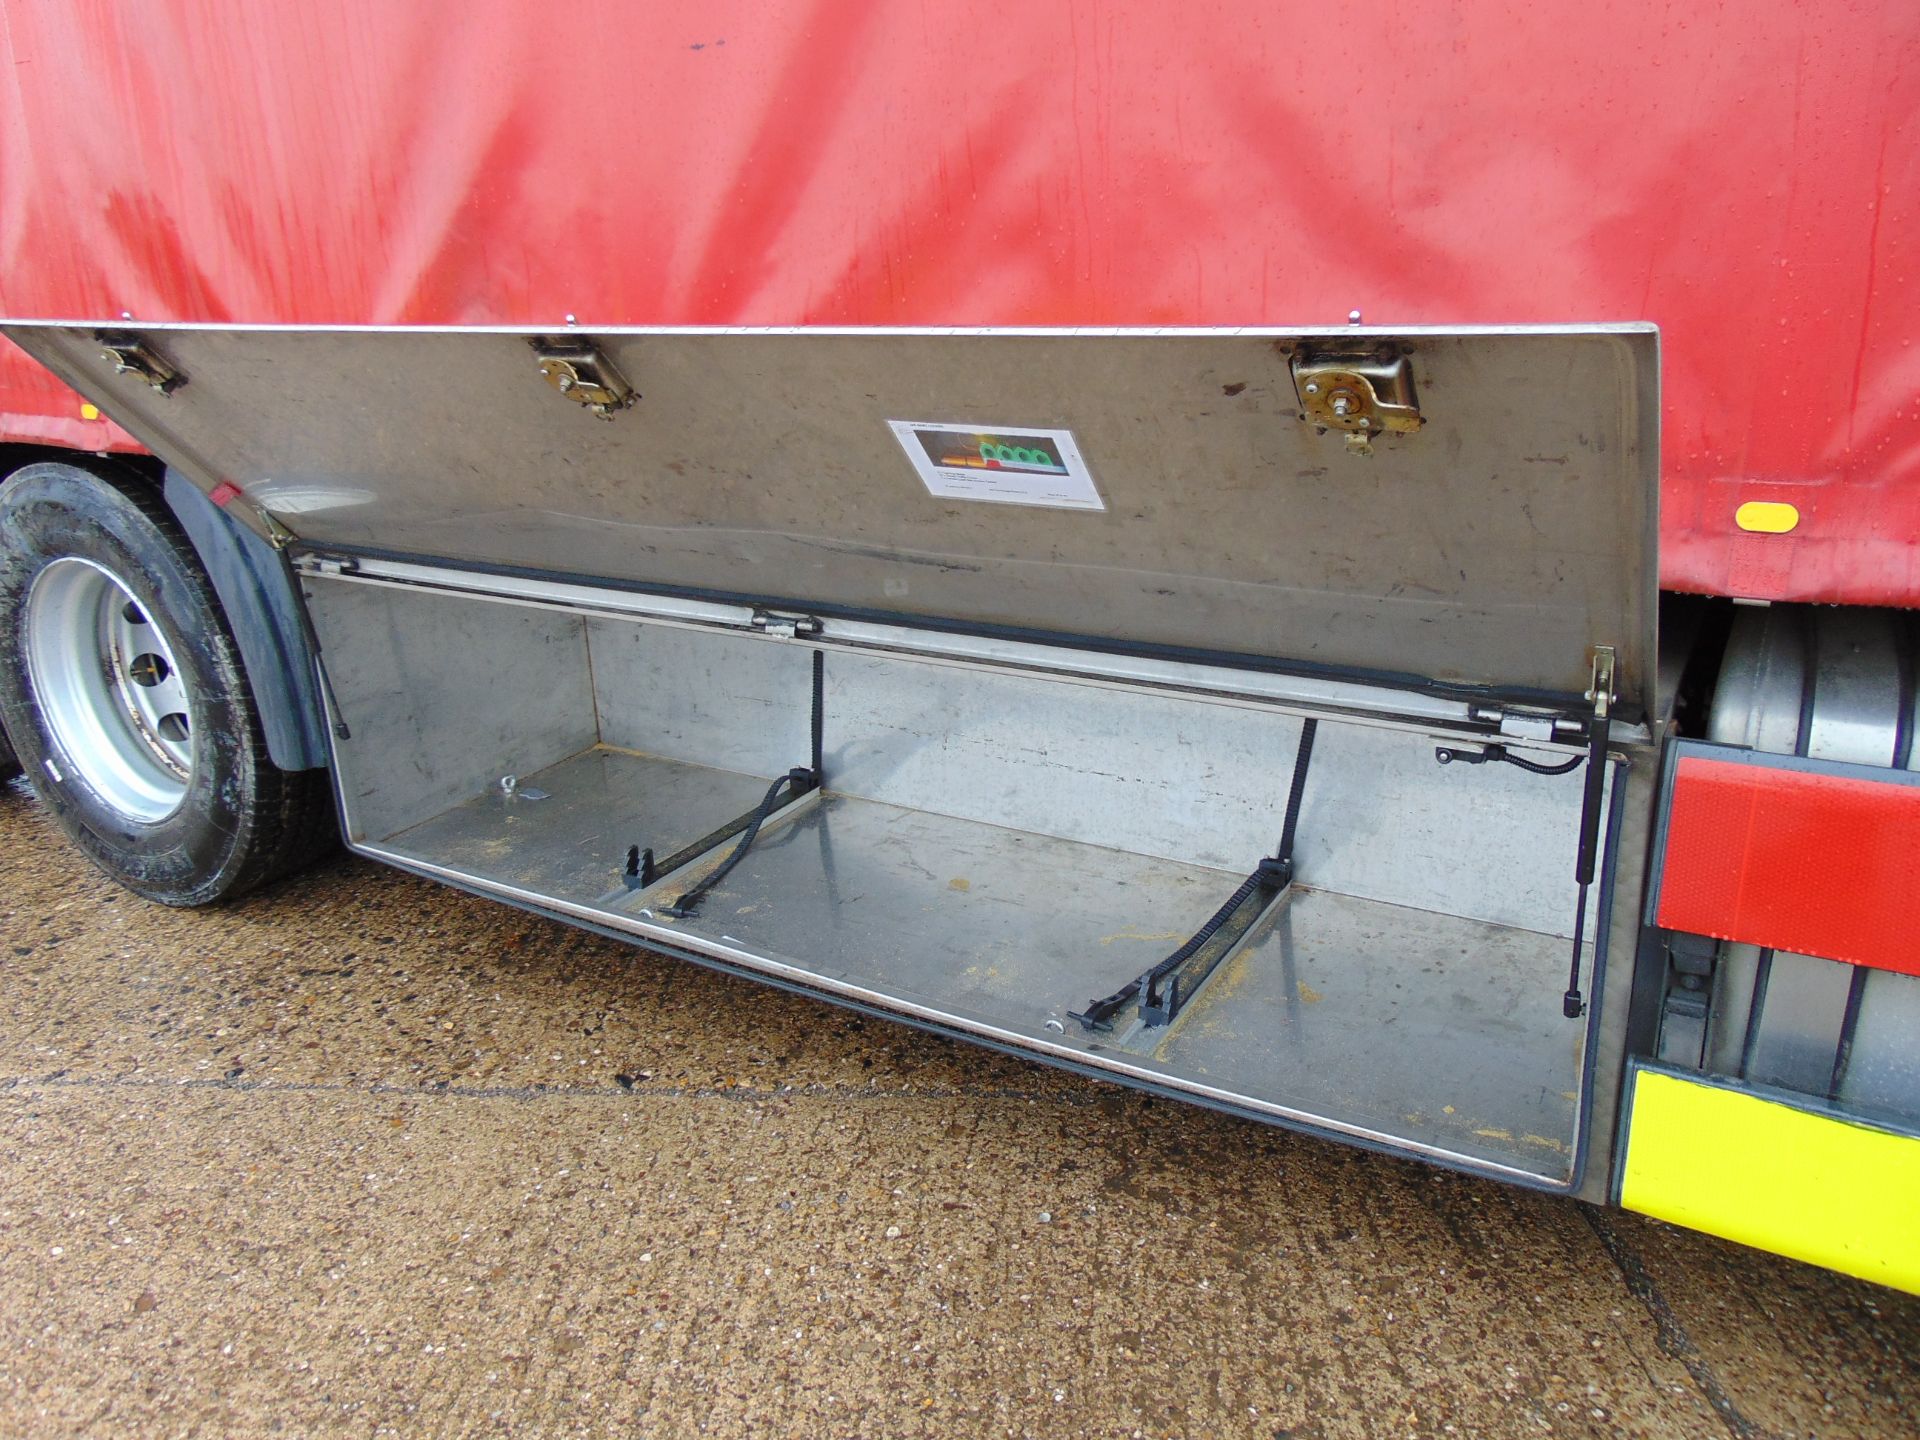 2004 MAN TG-A 6x2 Rear Steer Incident Support Unit - Image 17 of 27